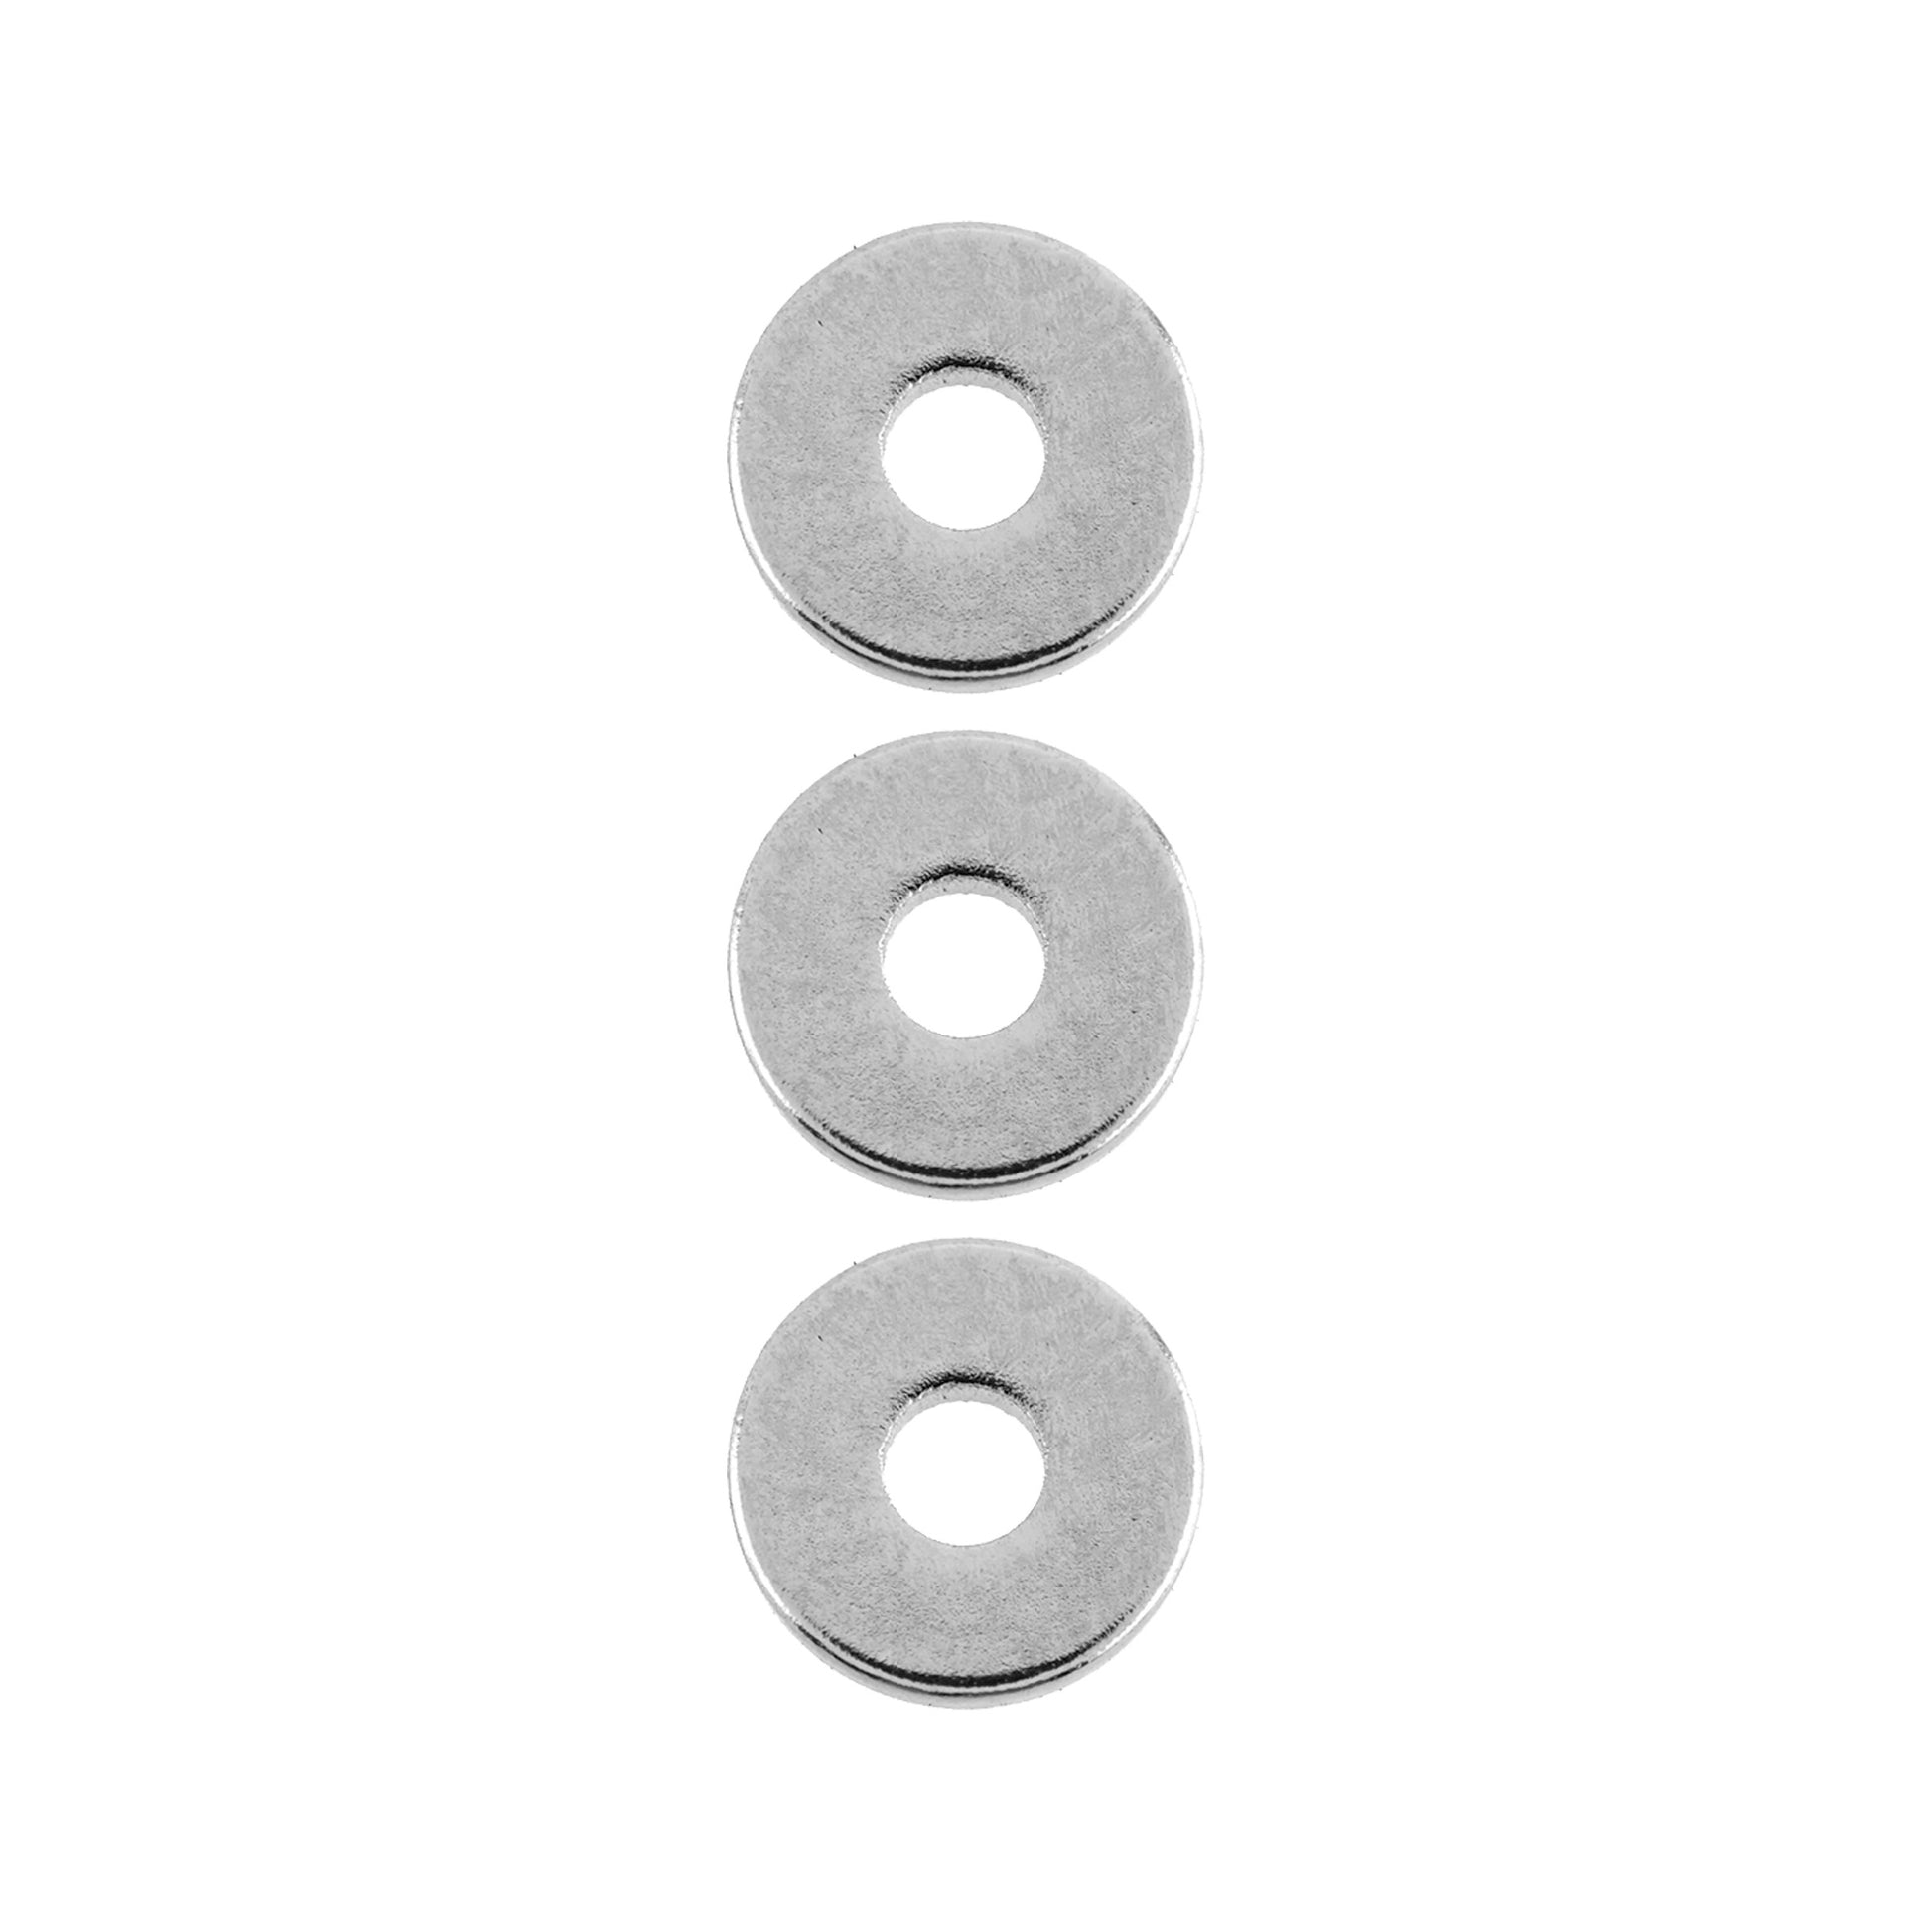 Load image into Gallery viewer, 07091 Neodymium Ring Magnets (3pk) - Front View